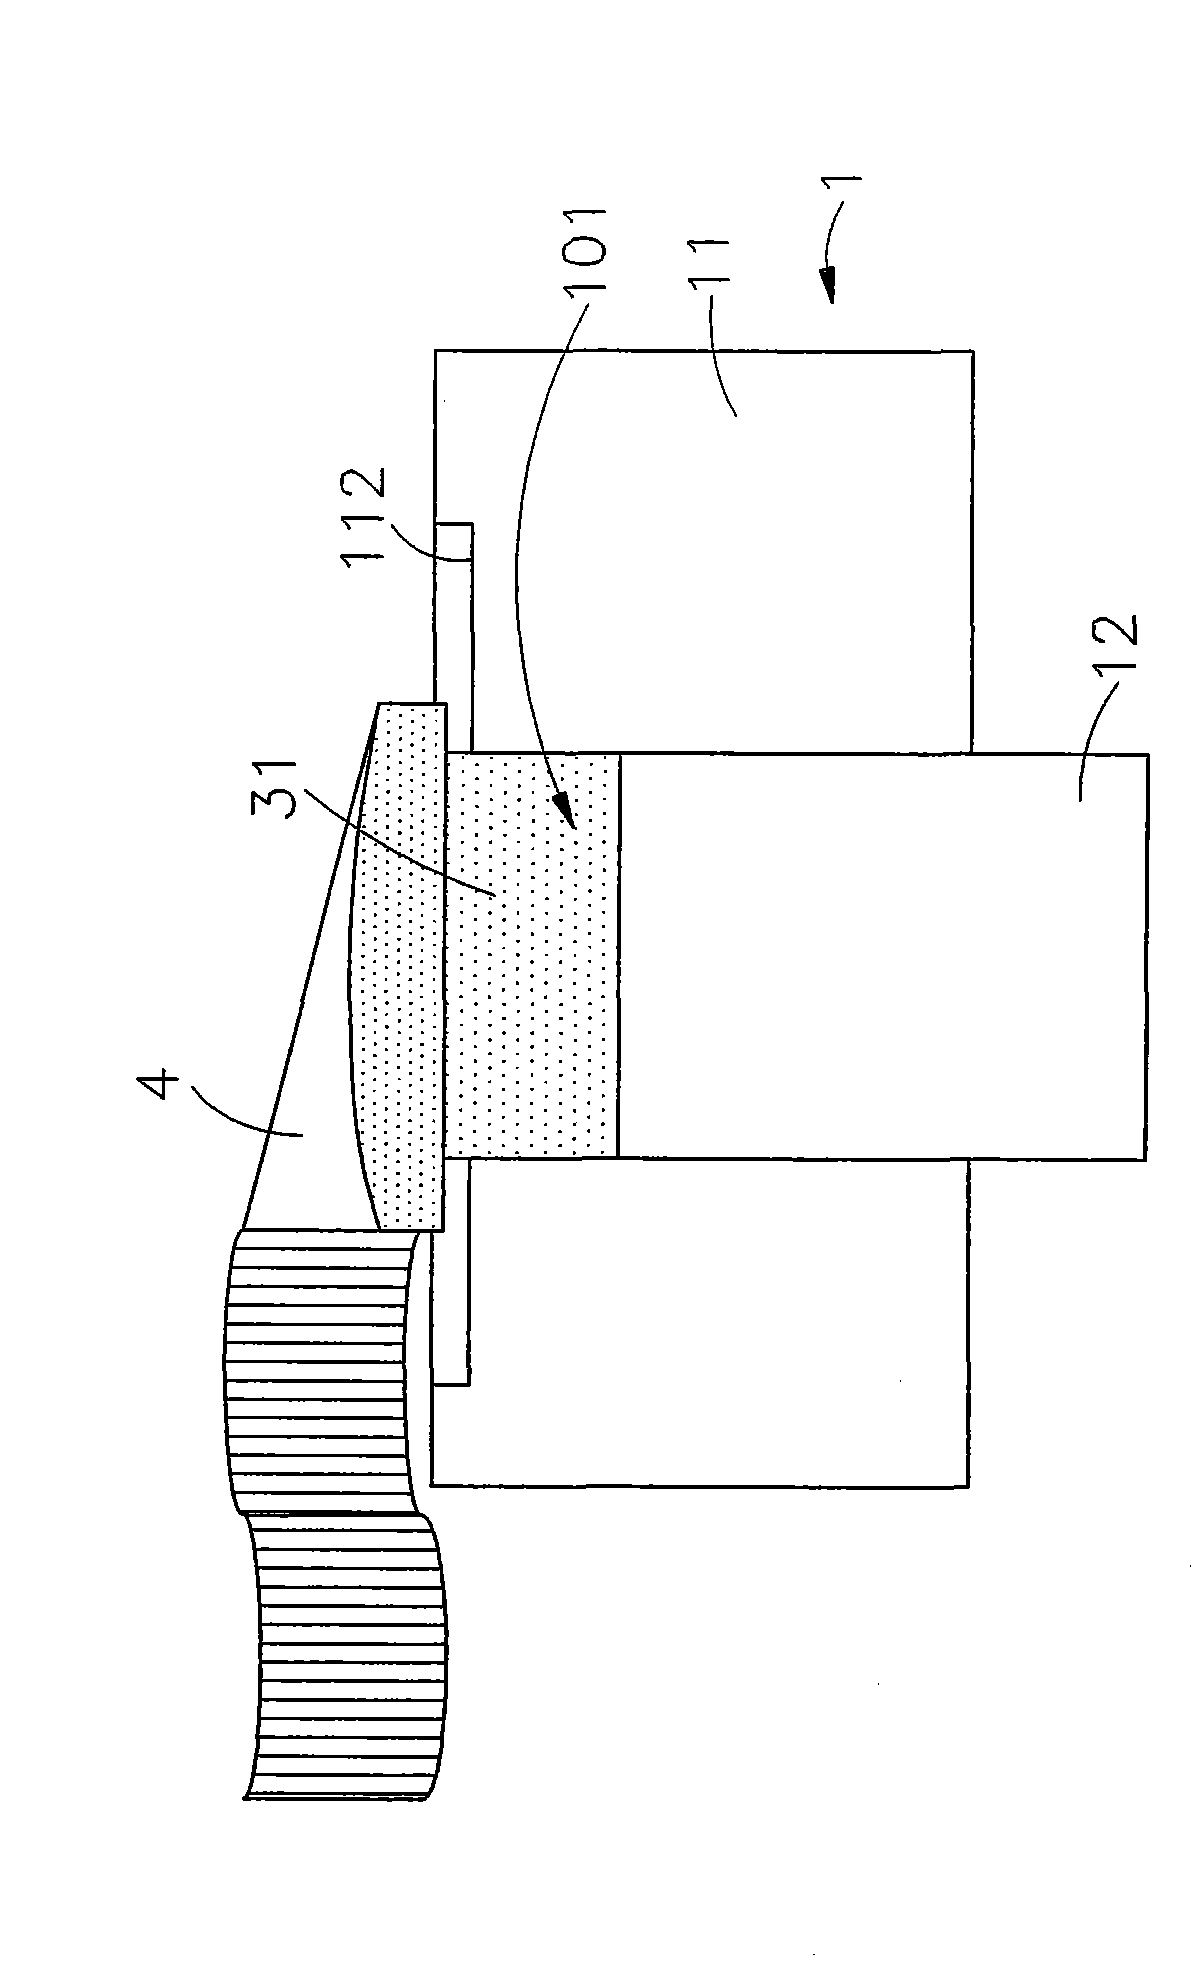 Method for manufacturing inductive element